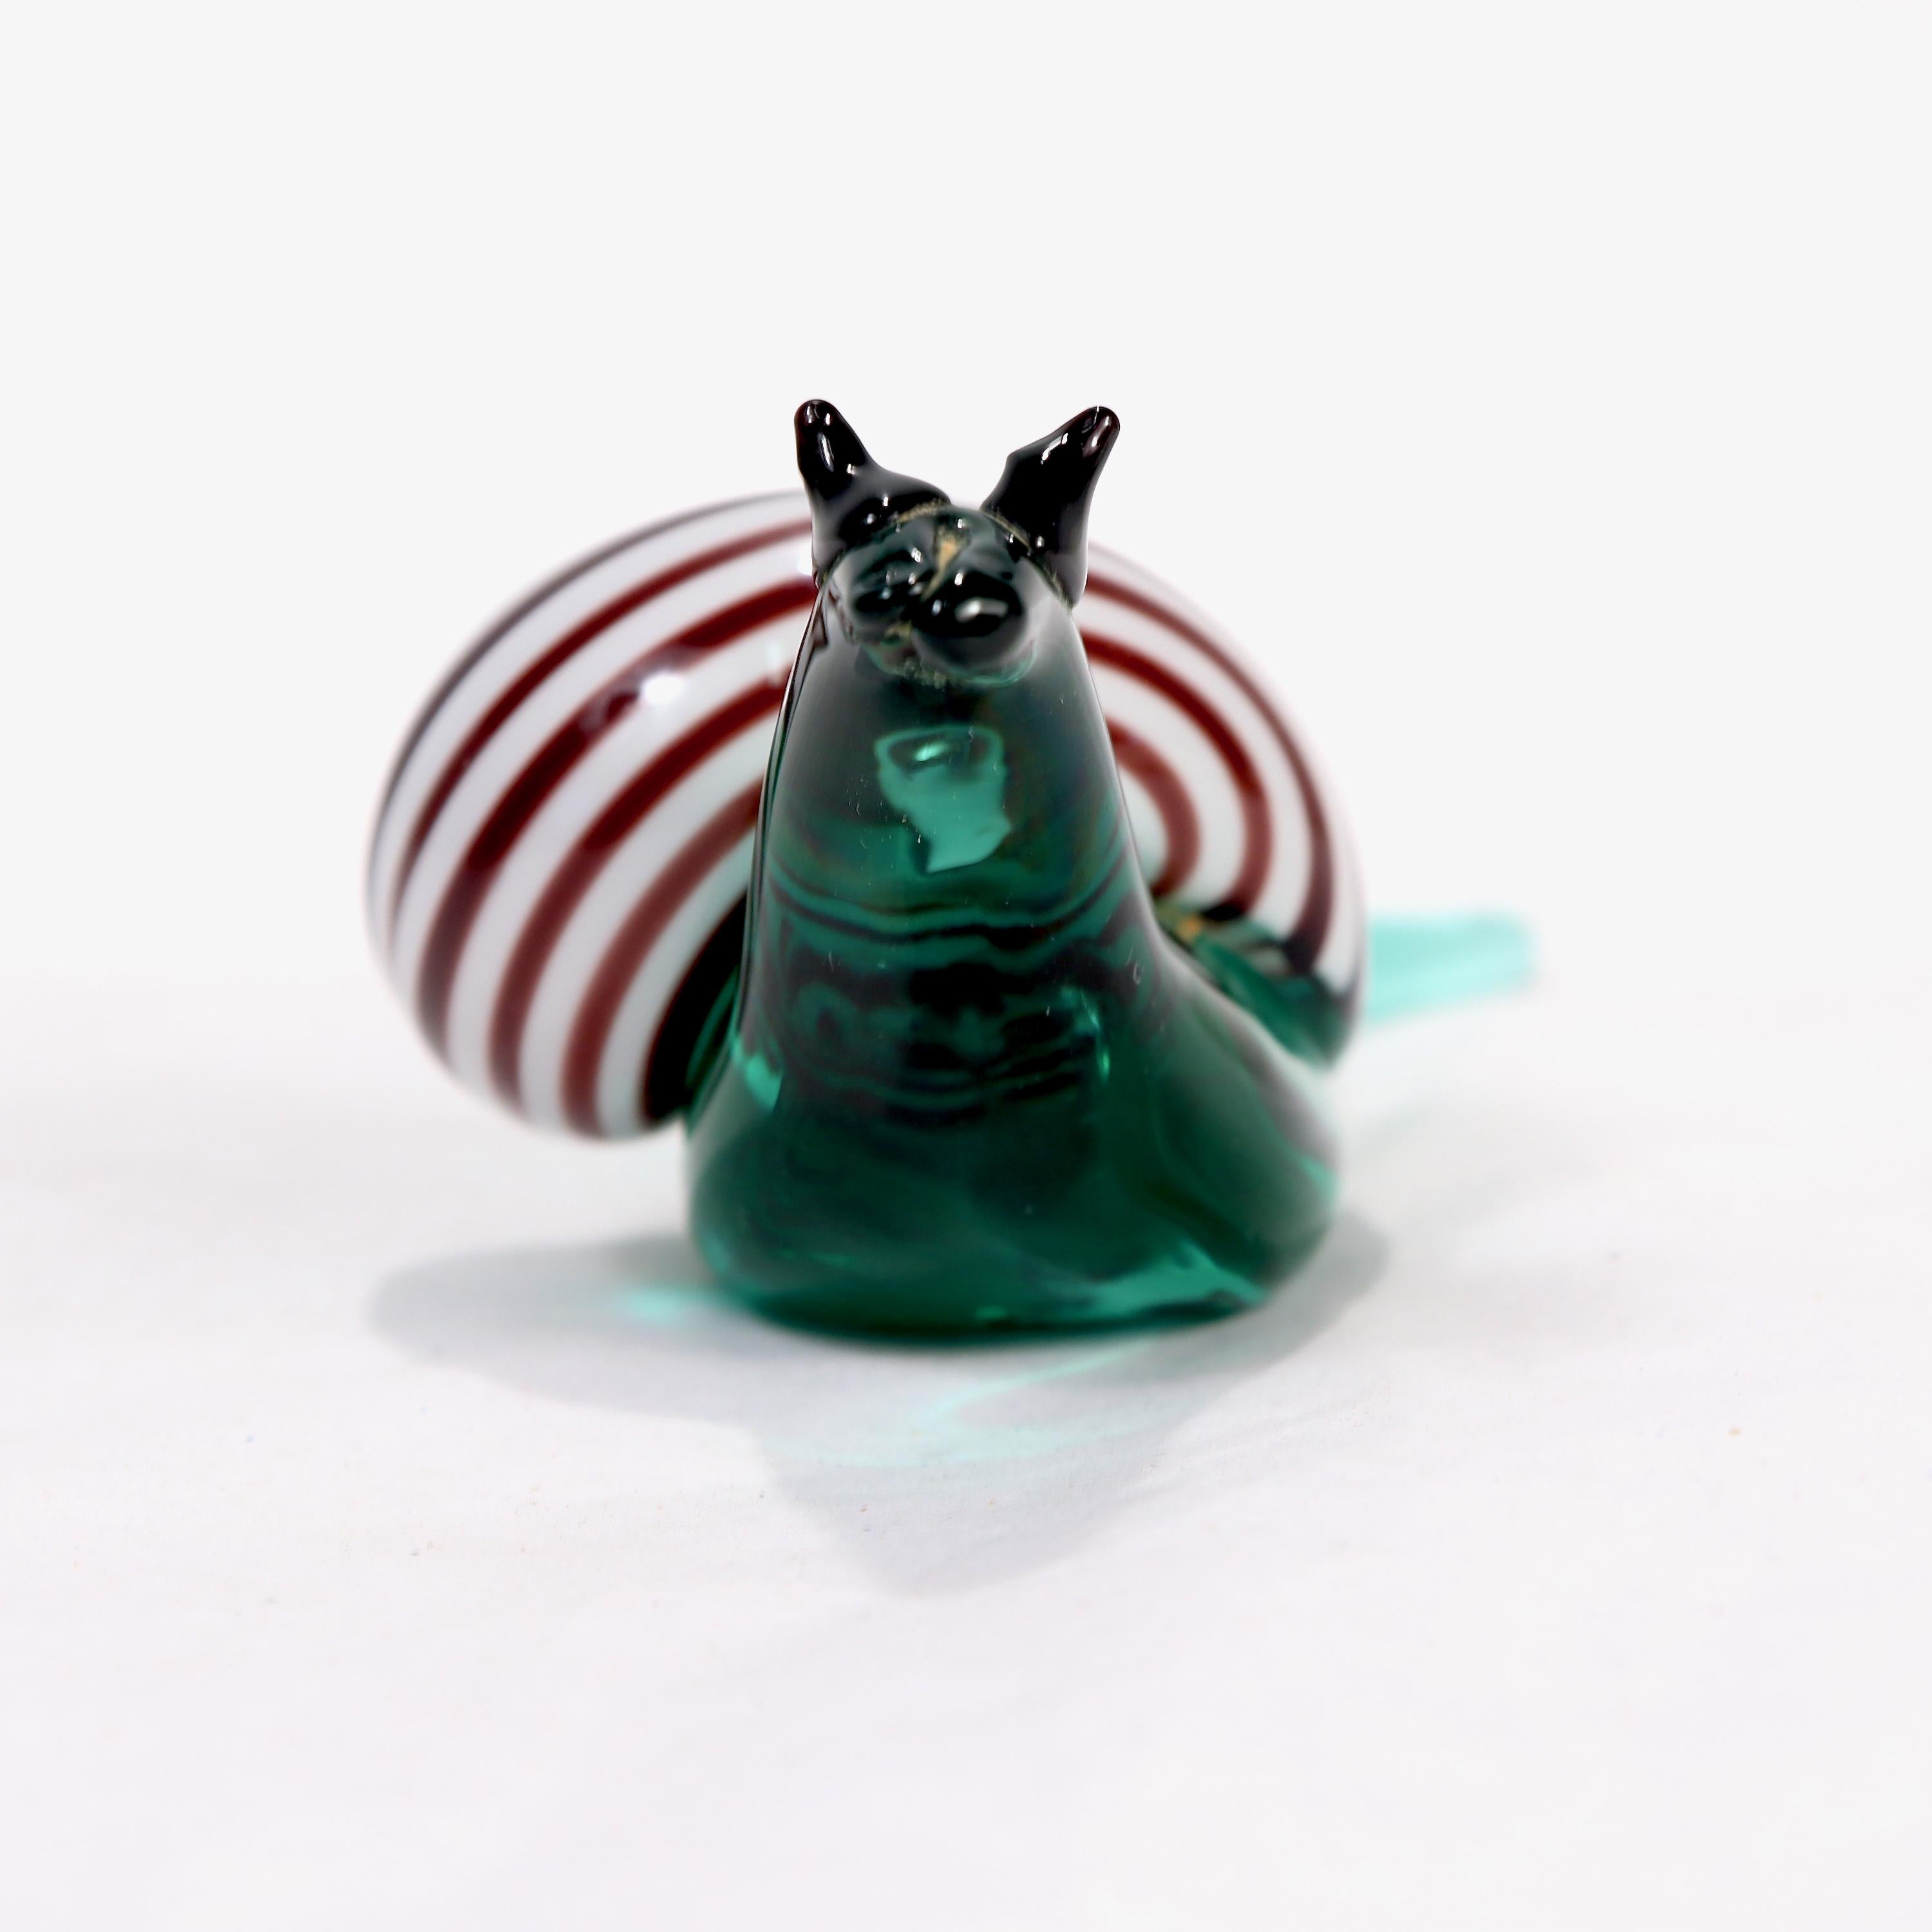 Signed & Labeled Salviati Venetian / Murano Art Glass Snail Paperweight Figurine In Good Condition For Sale In Philadelphia, PA